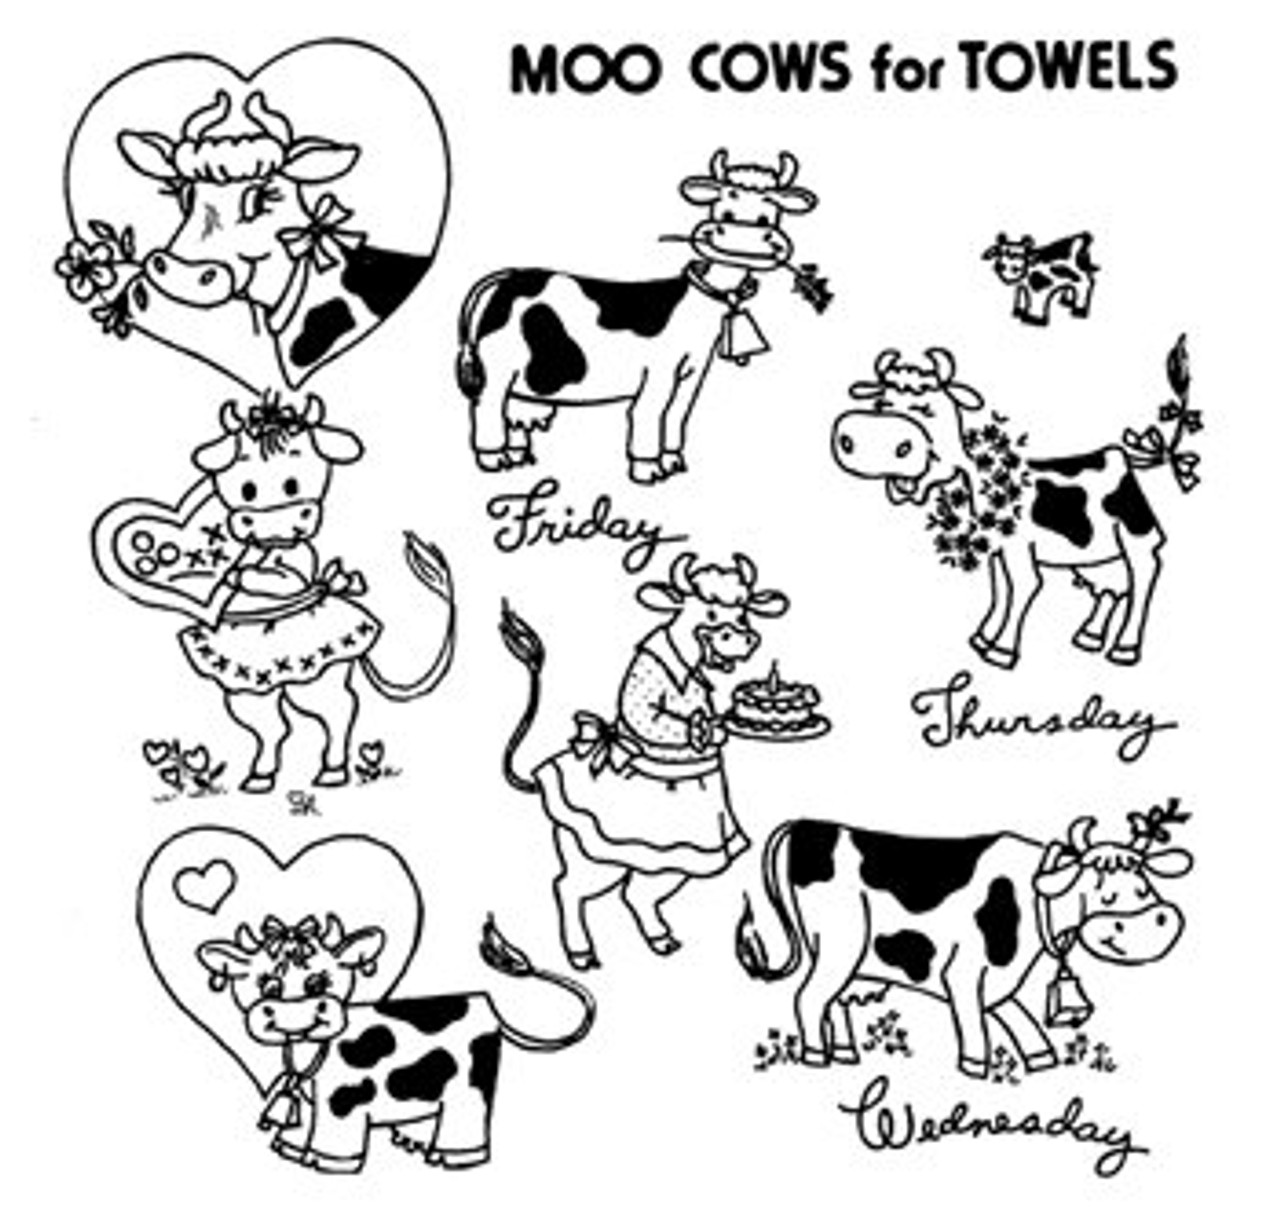 Aunt Martha's #3844 Moo Cows for Towels - Colonial Patterns, Inc.